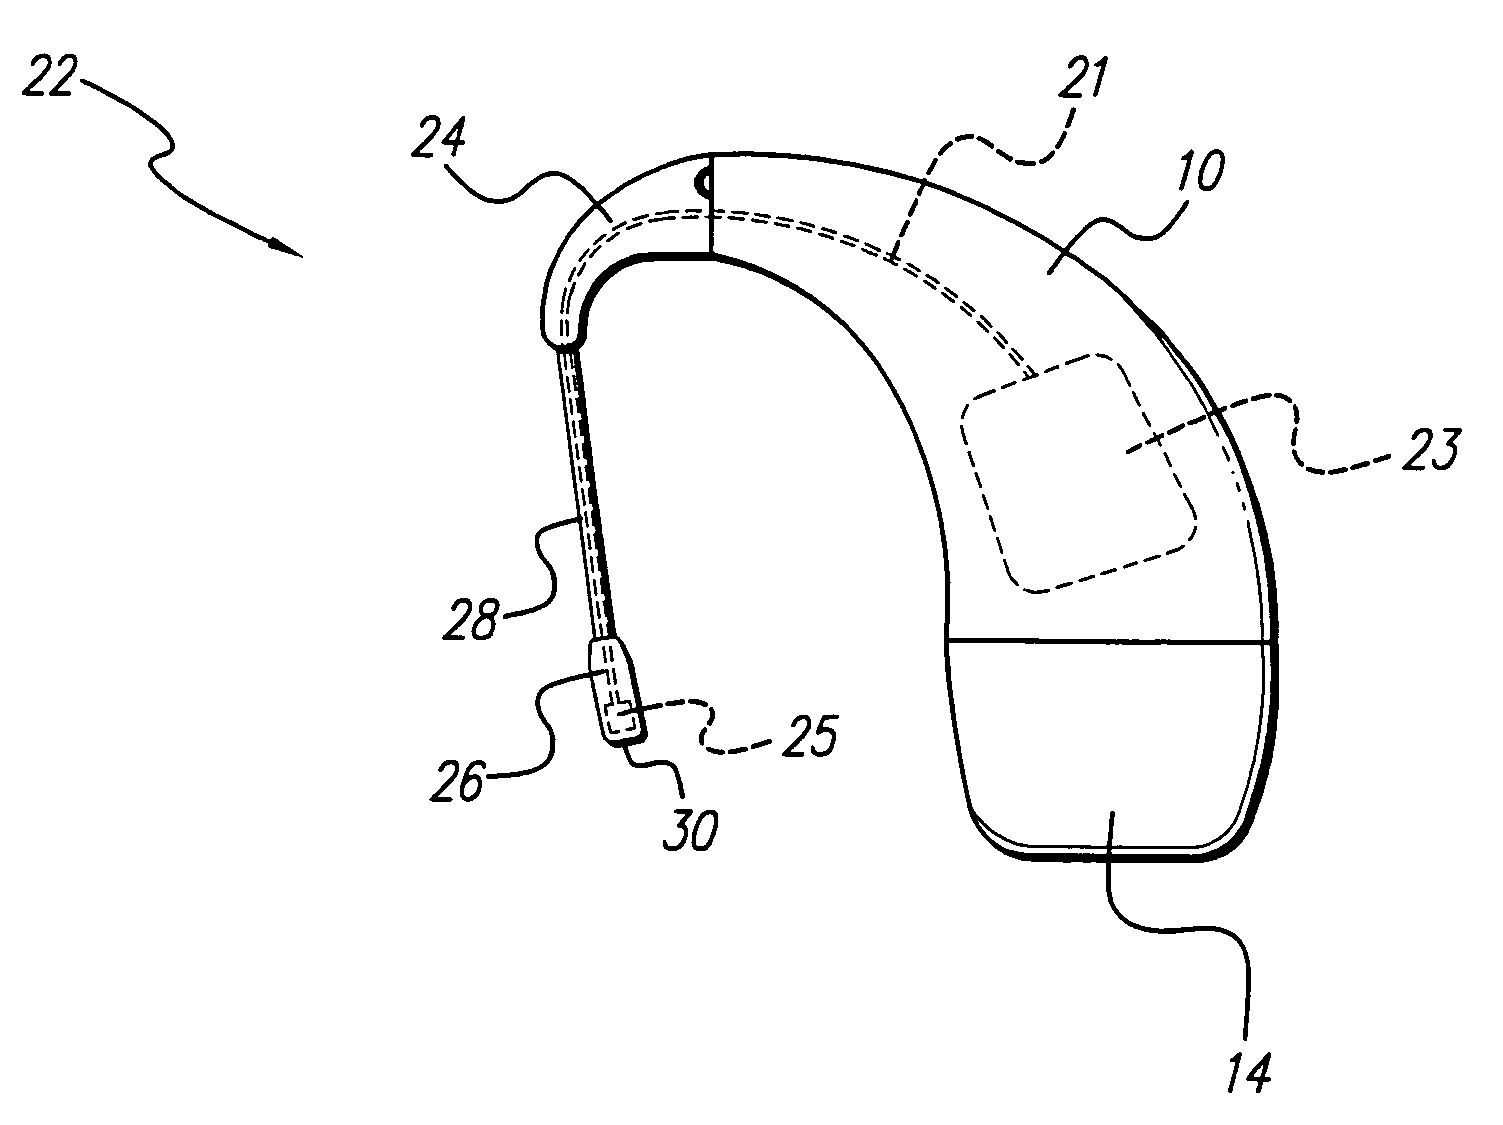 Method of constructing an in the ear auxiliary microphone for behind the ear hearing prosthetic